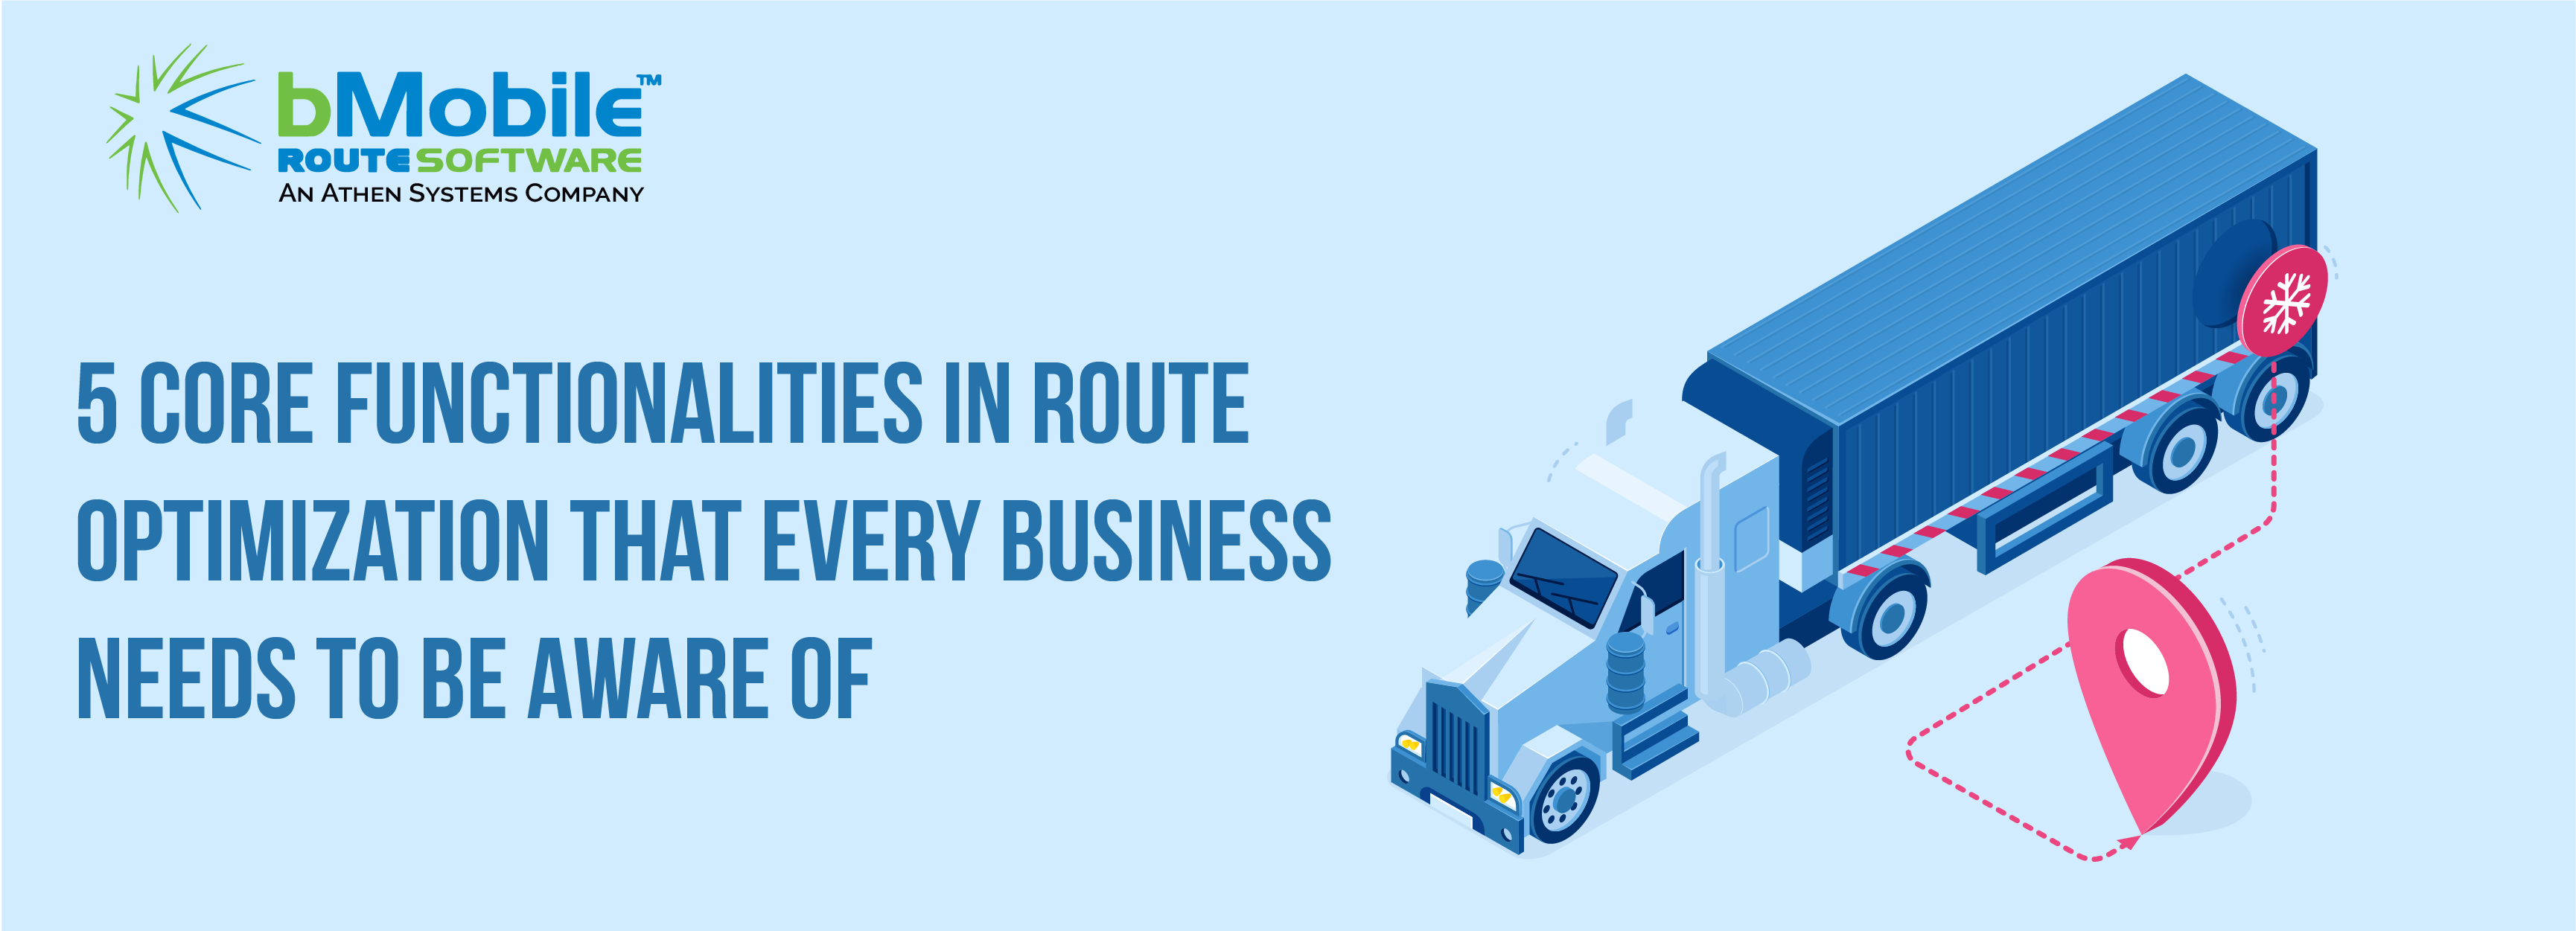 5 Core Functionalities in Route Optimization That Every Business Needs to Be Aware Of